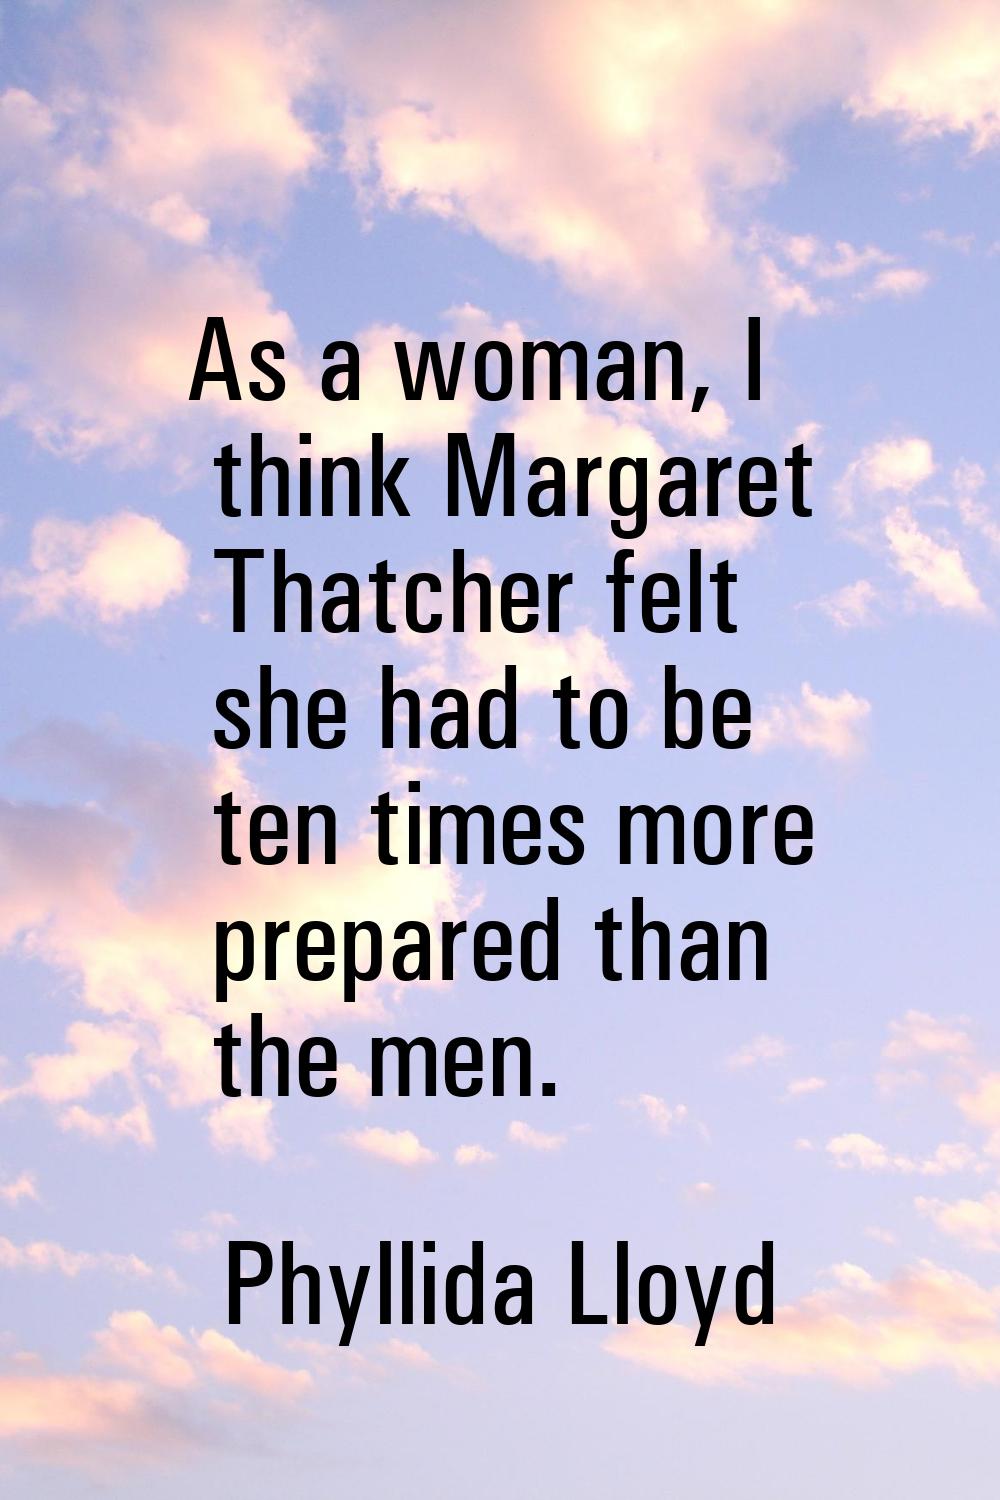 As a woman, I think Margaret Thatcher felt she had to be ten times more prepared than the men.